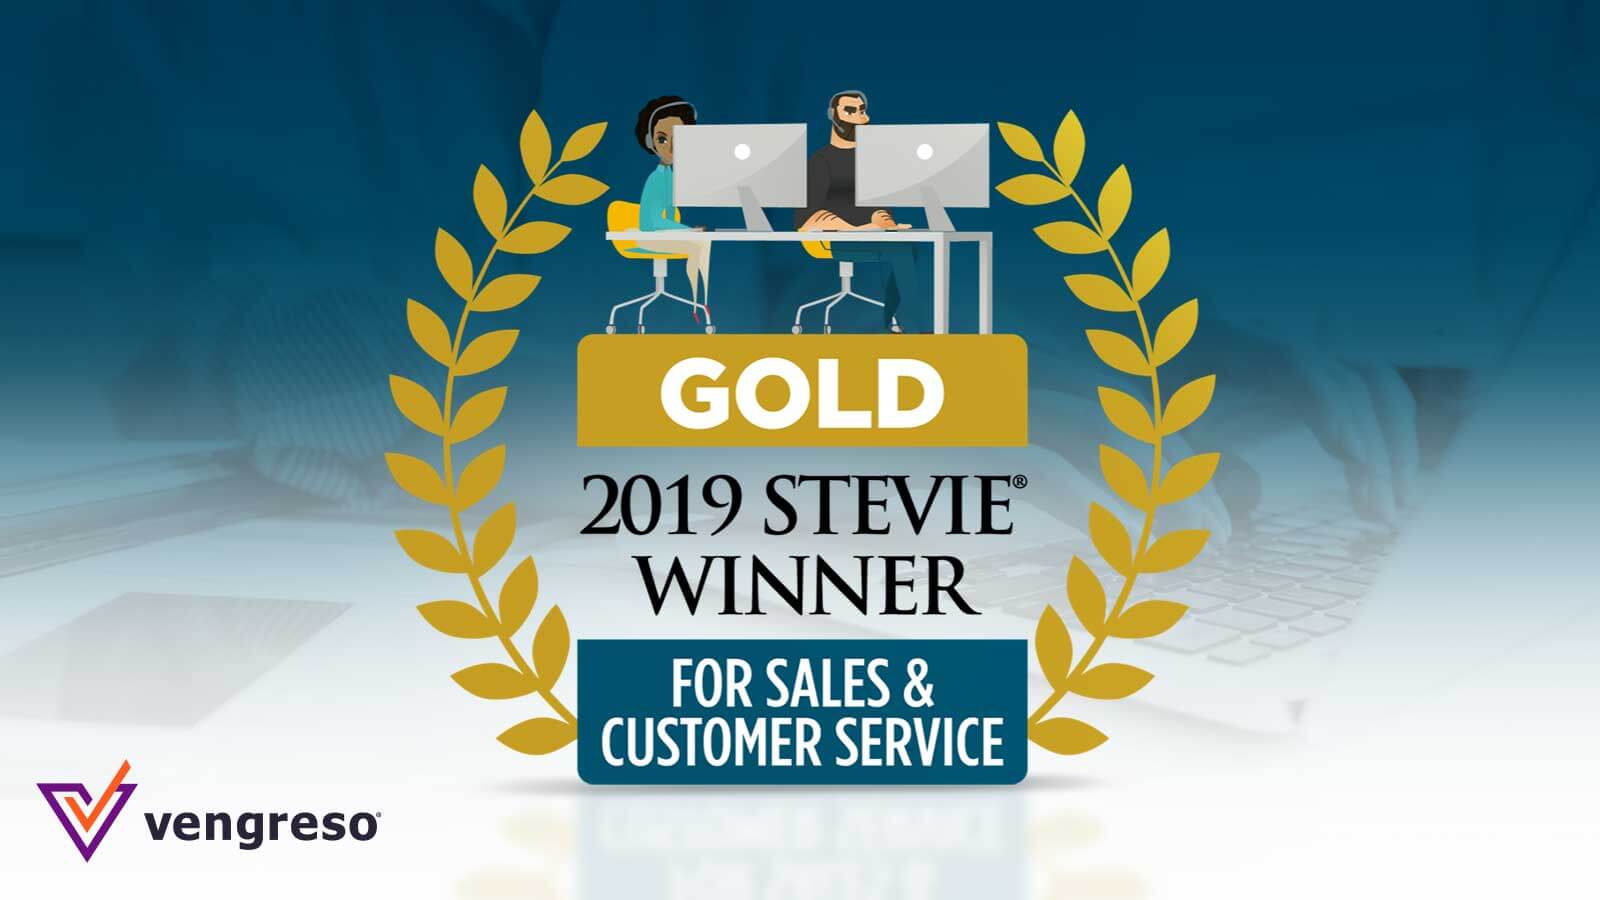 Vengreso wins gold Stevie® Award for sales and customer service.